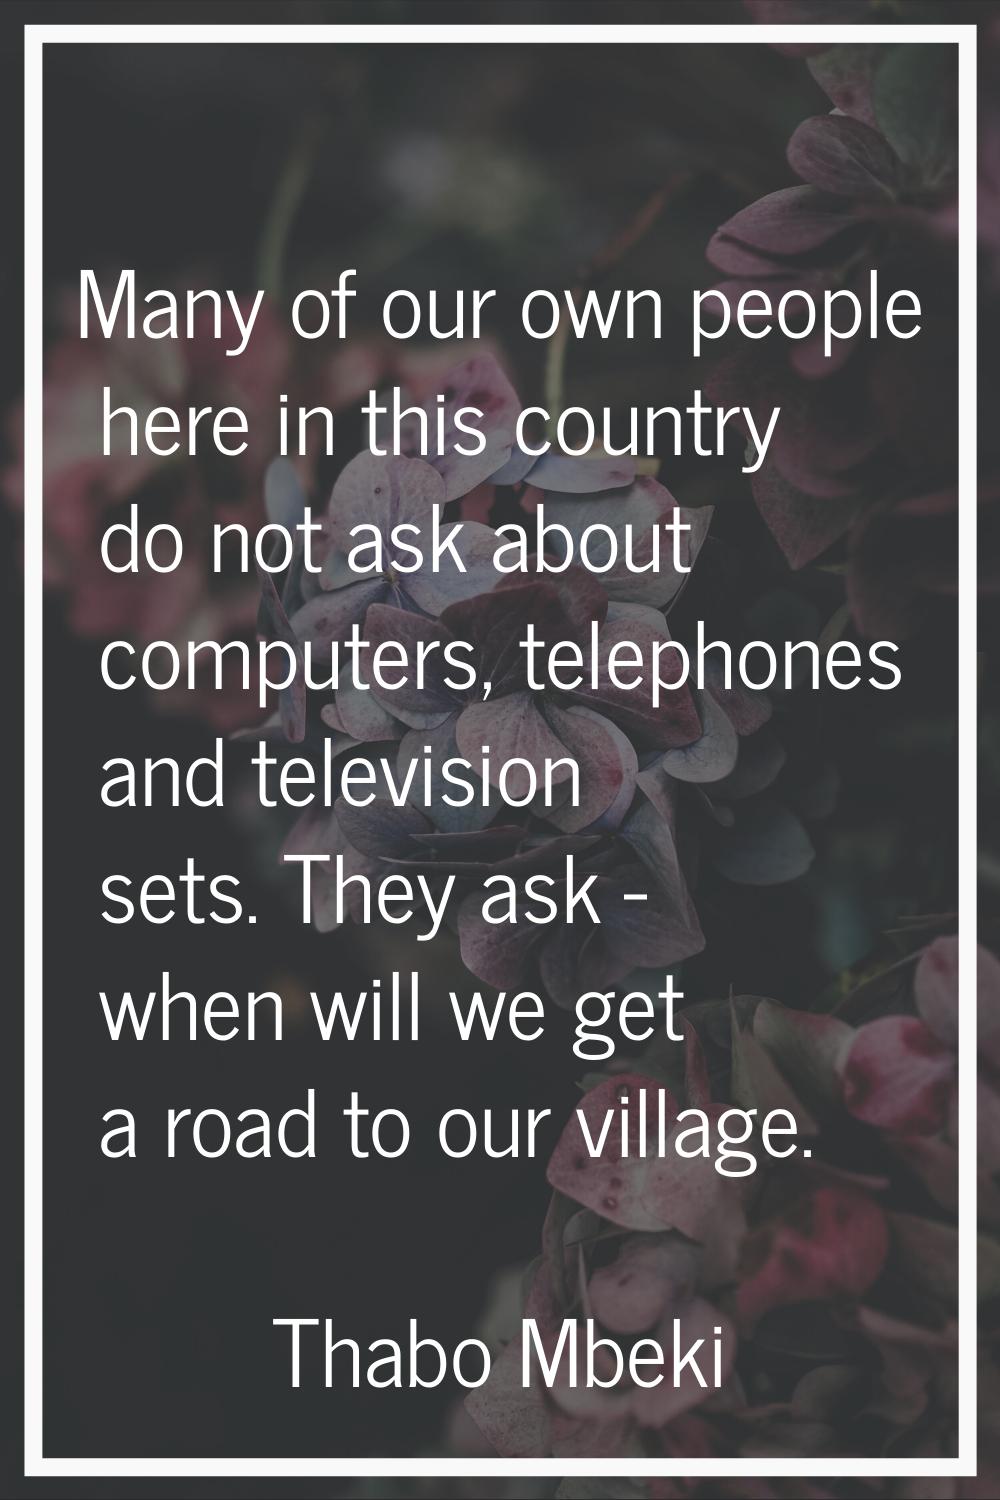 Many of our own people here in this country do not ask about computers, telephones and television s